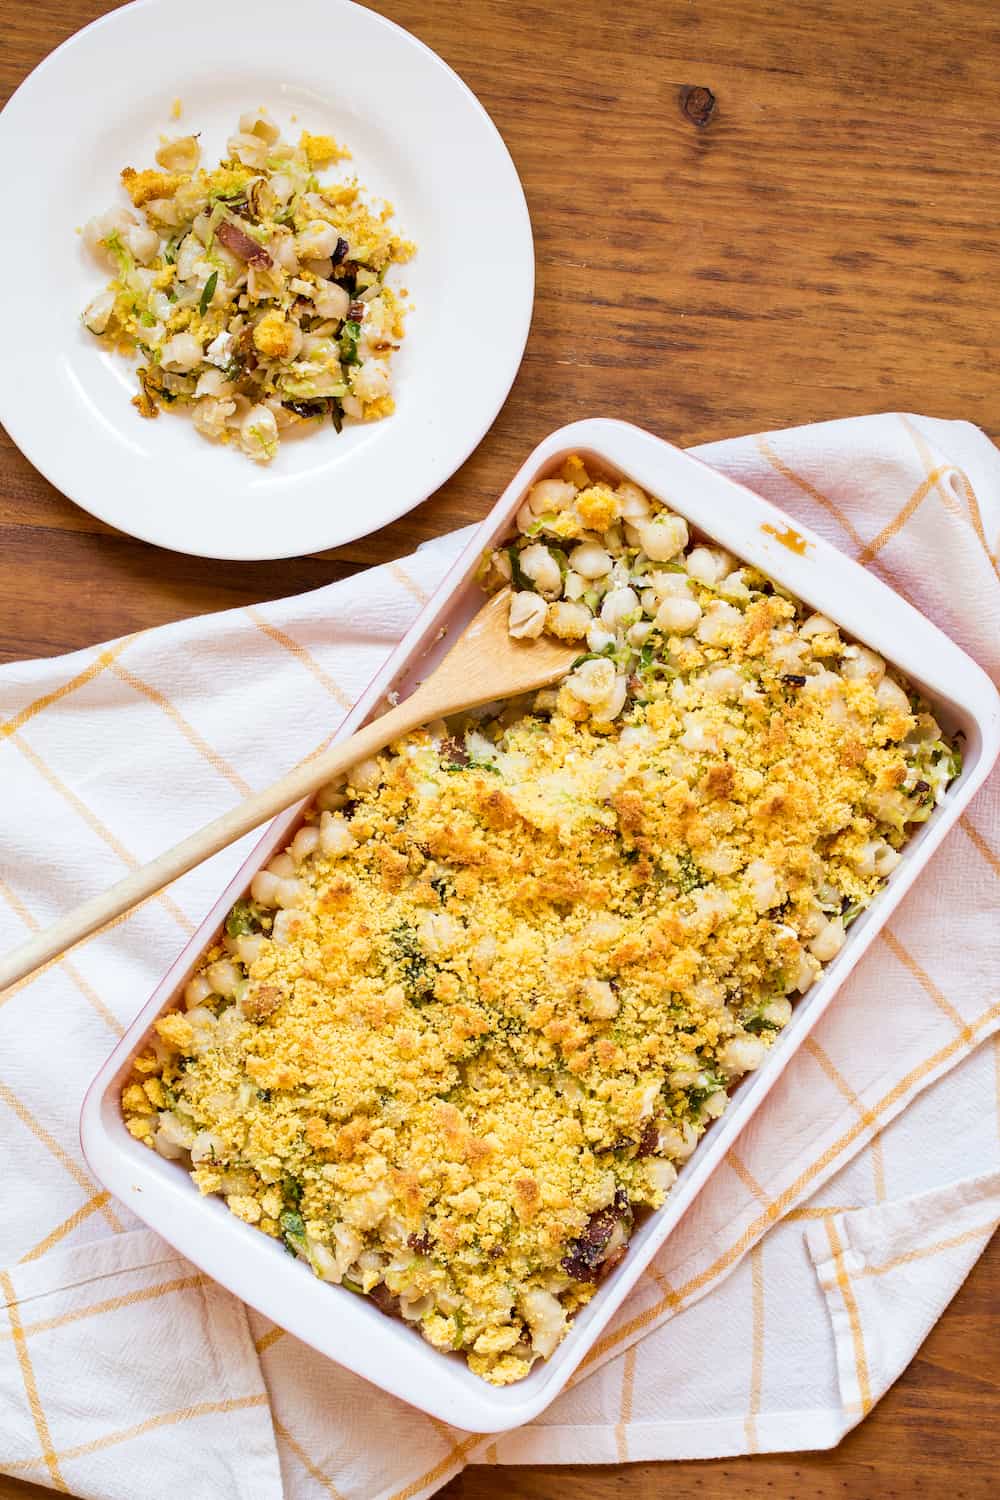 Baked Mac and Cheat: A Shortcut To Mac and Cheese Bliss